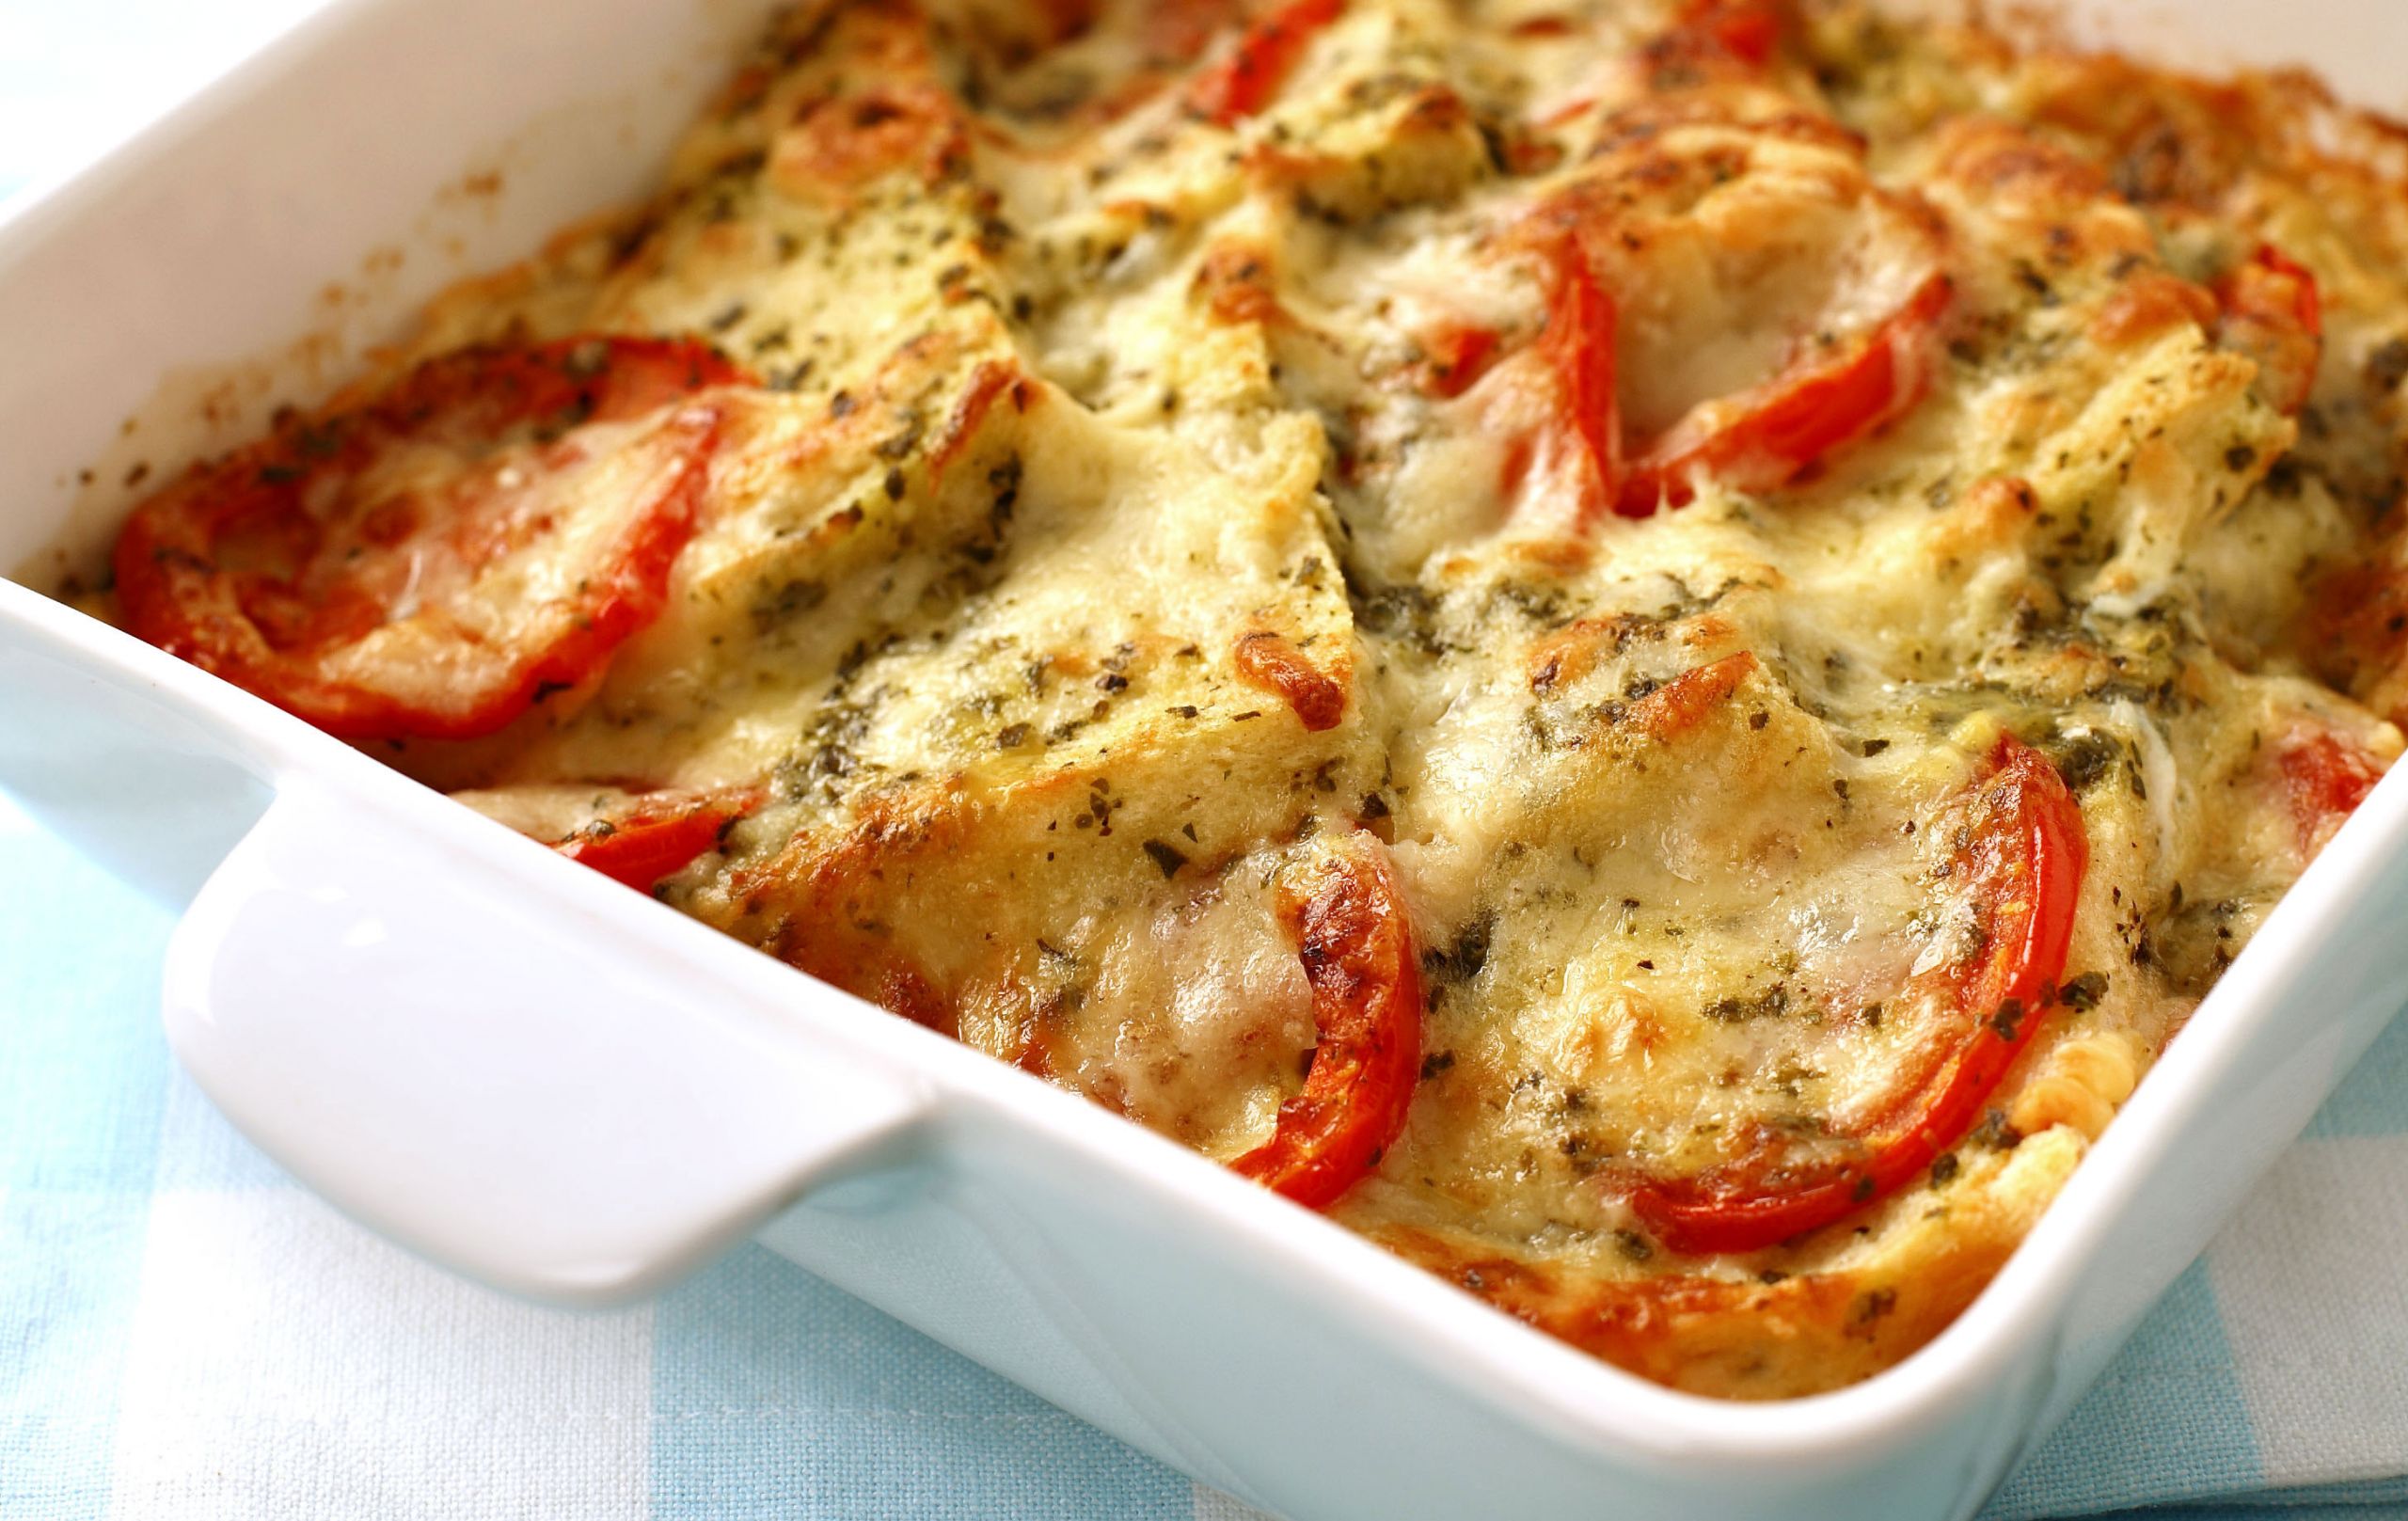 Baked Macaroni And Cheese With Tomatoes And Breadcrumbs
 Cheese And Tomato Bake Dinner Recipes